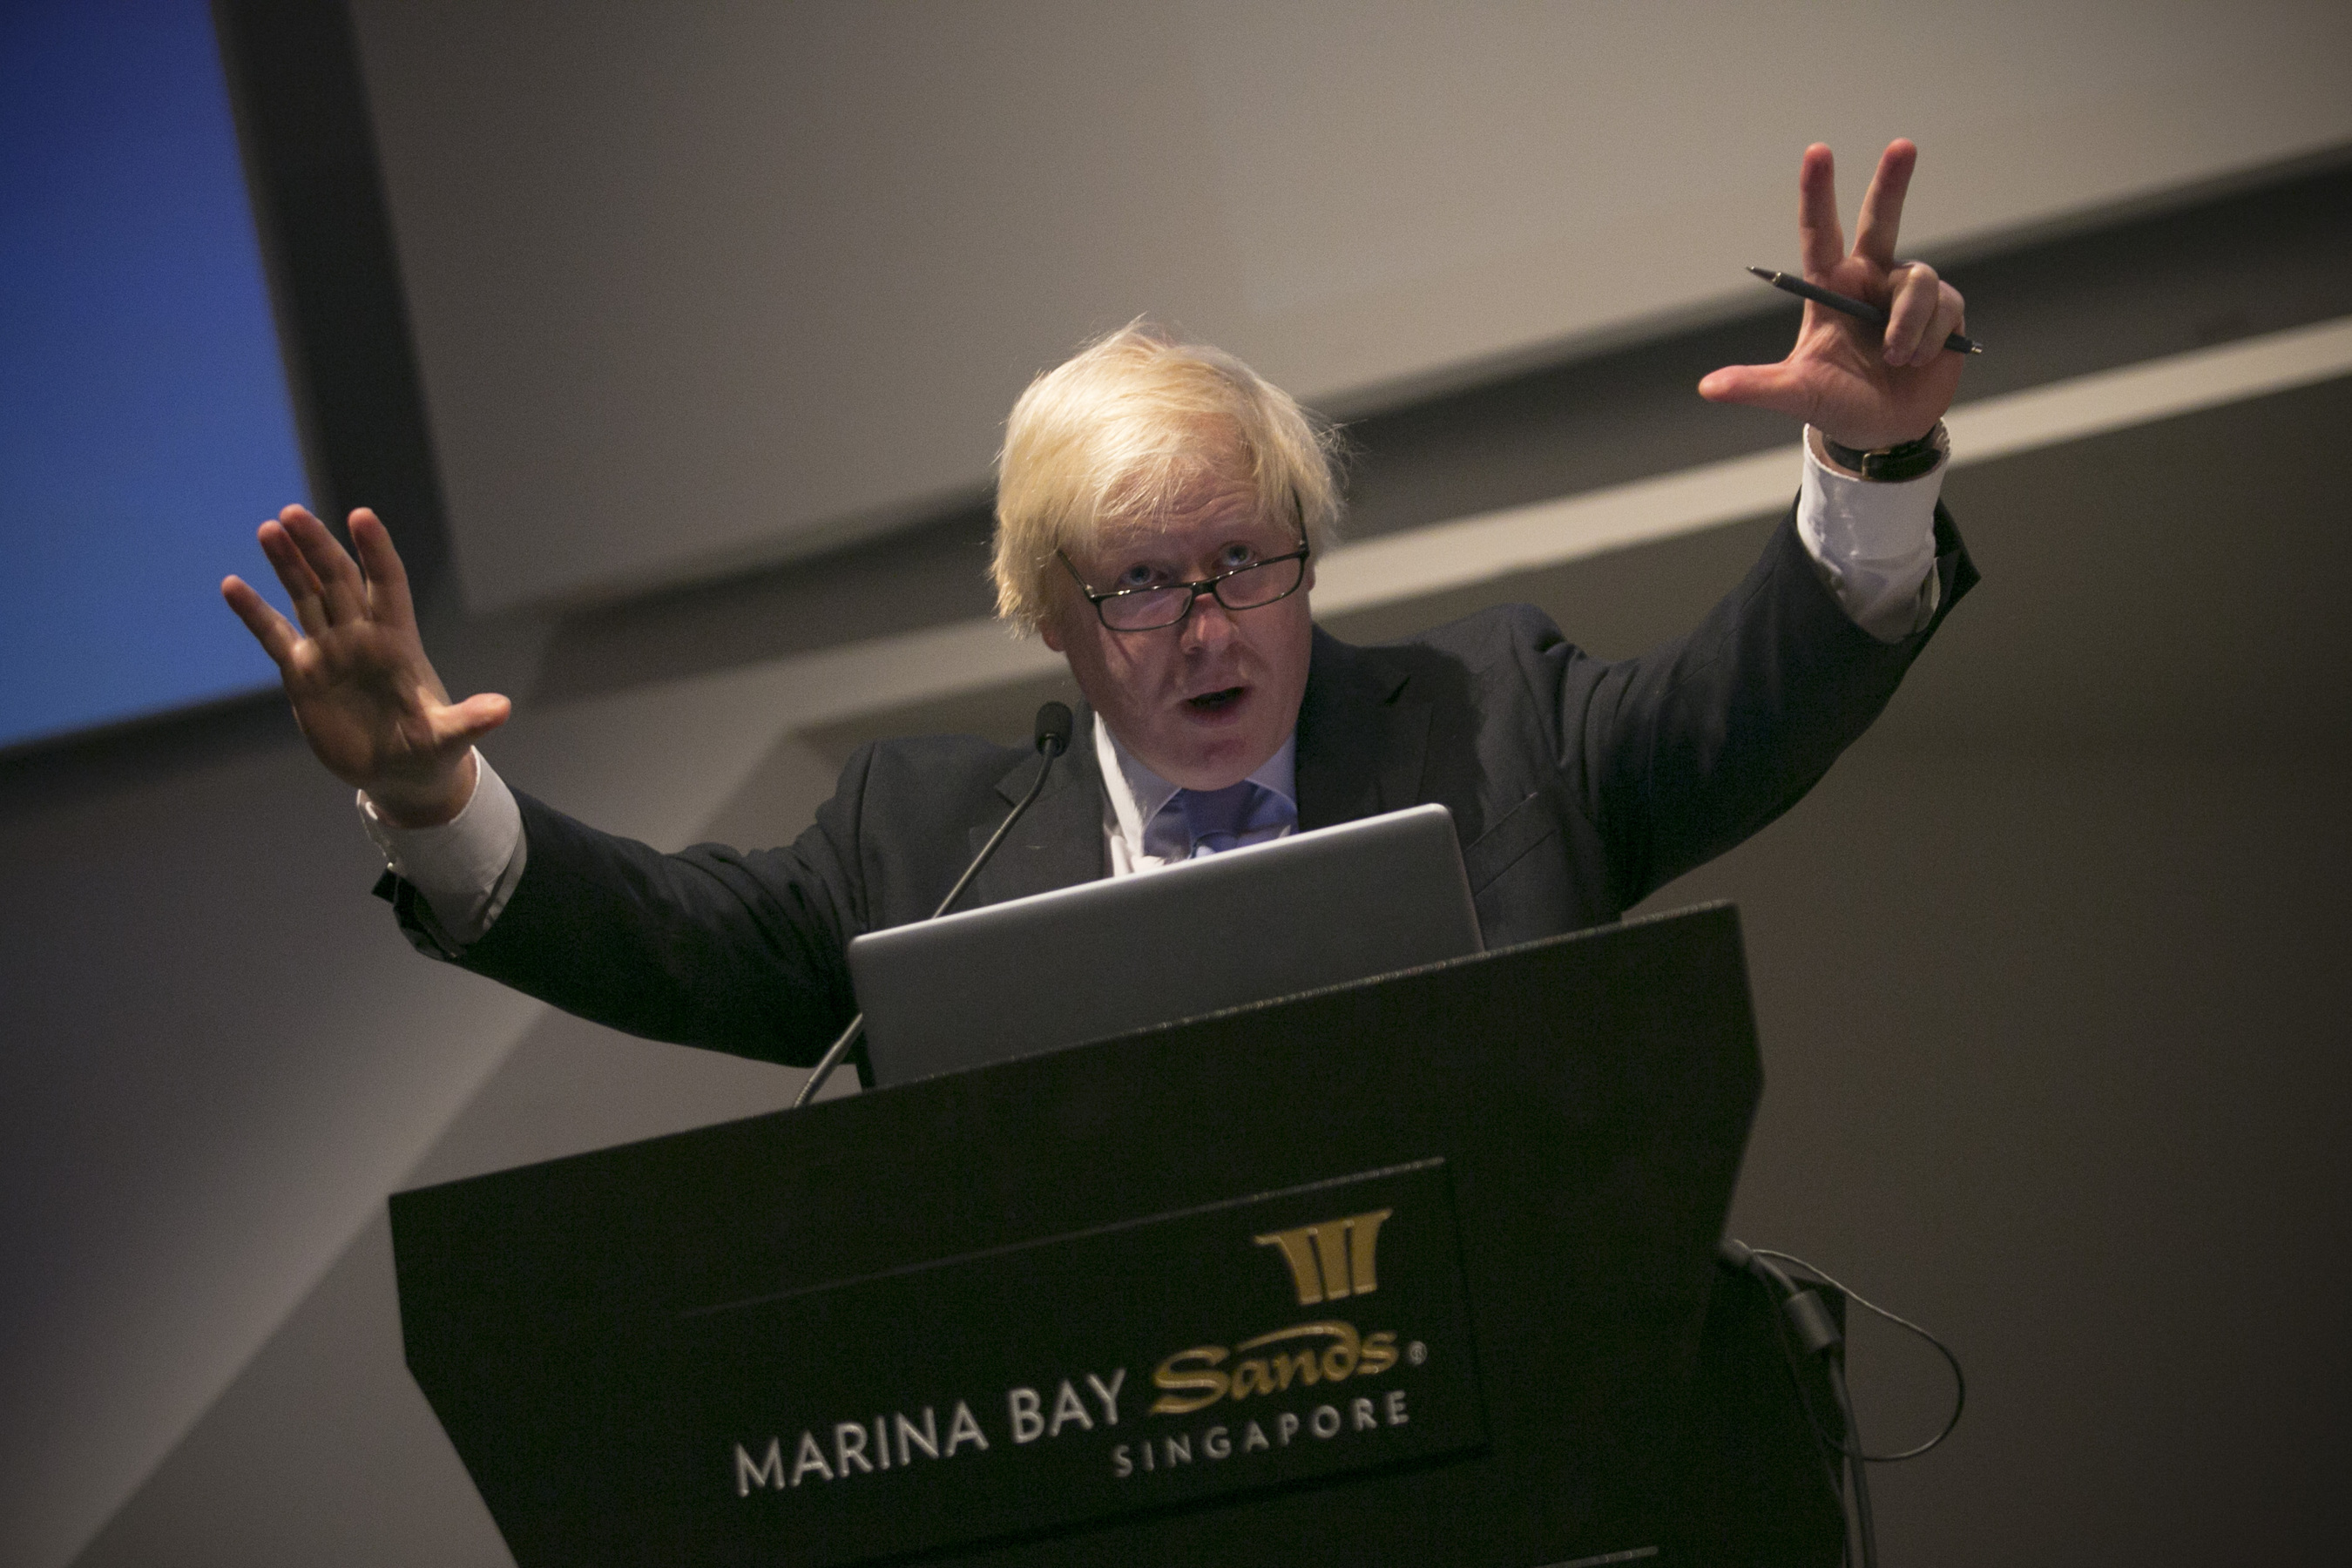 The Mayor of London, Boris Johnson, is pictured at the ArtScience Museum in Singapore where he revealed new figures compiled by London & Partners that show record venture capital investment into London-based FinTech firms. So far this year companies have attracted more than US$539 million âeuro" triple the amount raised in 2013 âeuro" and an amount representing more than half of all FinTech investment across Europe. The Mayor is on a six day trade mission to the Far East where he is aiming to build on his work to create jobs and growth, and promote London to the world as a major investment destination as he leads a trade mission to Singapore, Jakarta and Kuala Lumpur. (PRNewsFoto/London _ Partners)